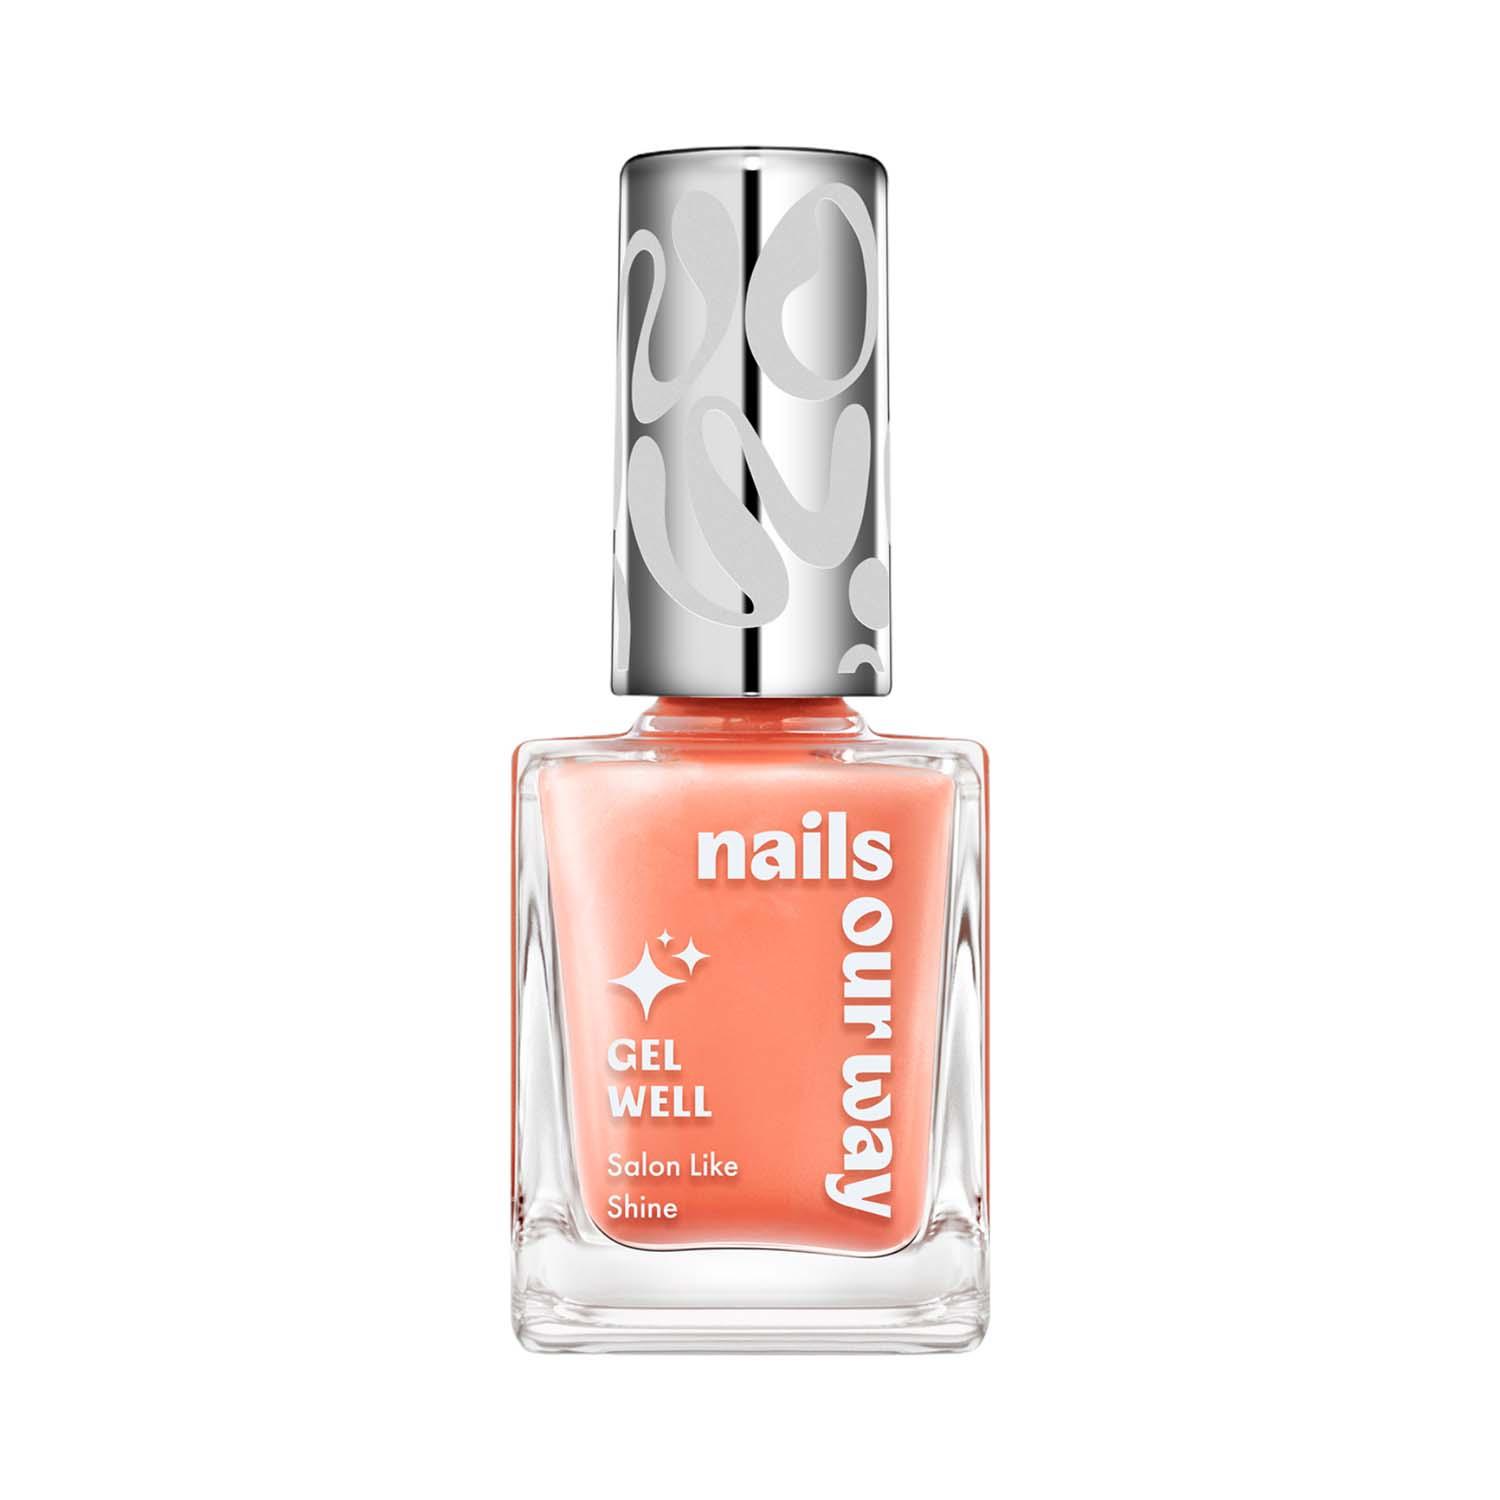 Nails Our Way | Nails Our Way Gel Well Nail Enamel - 304 Funky (10 ml)